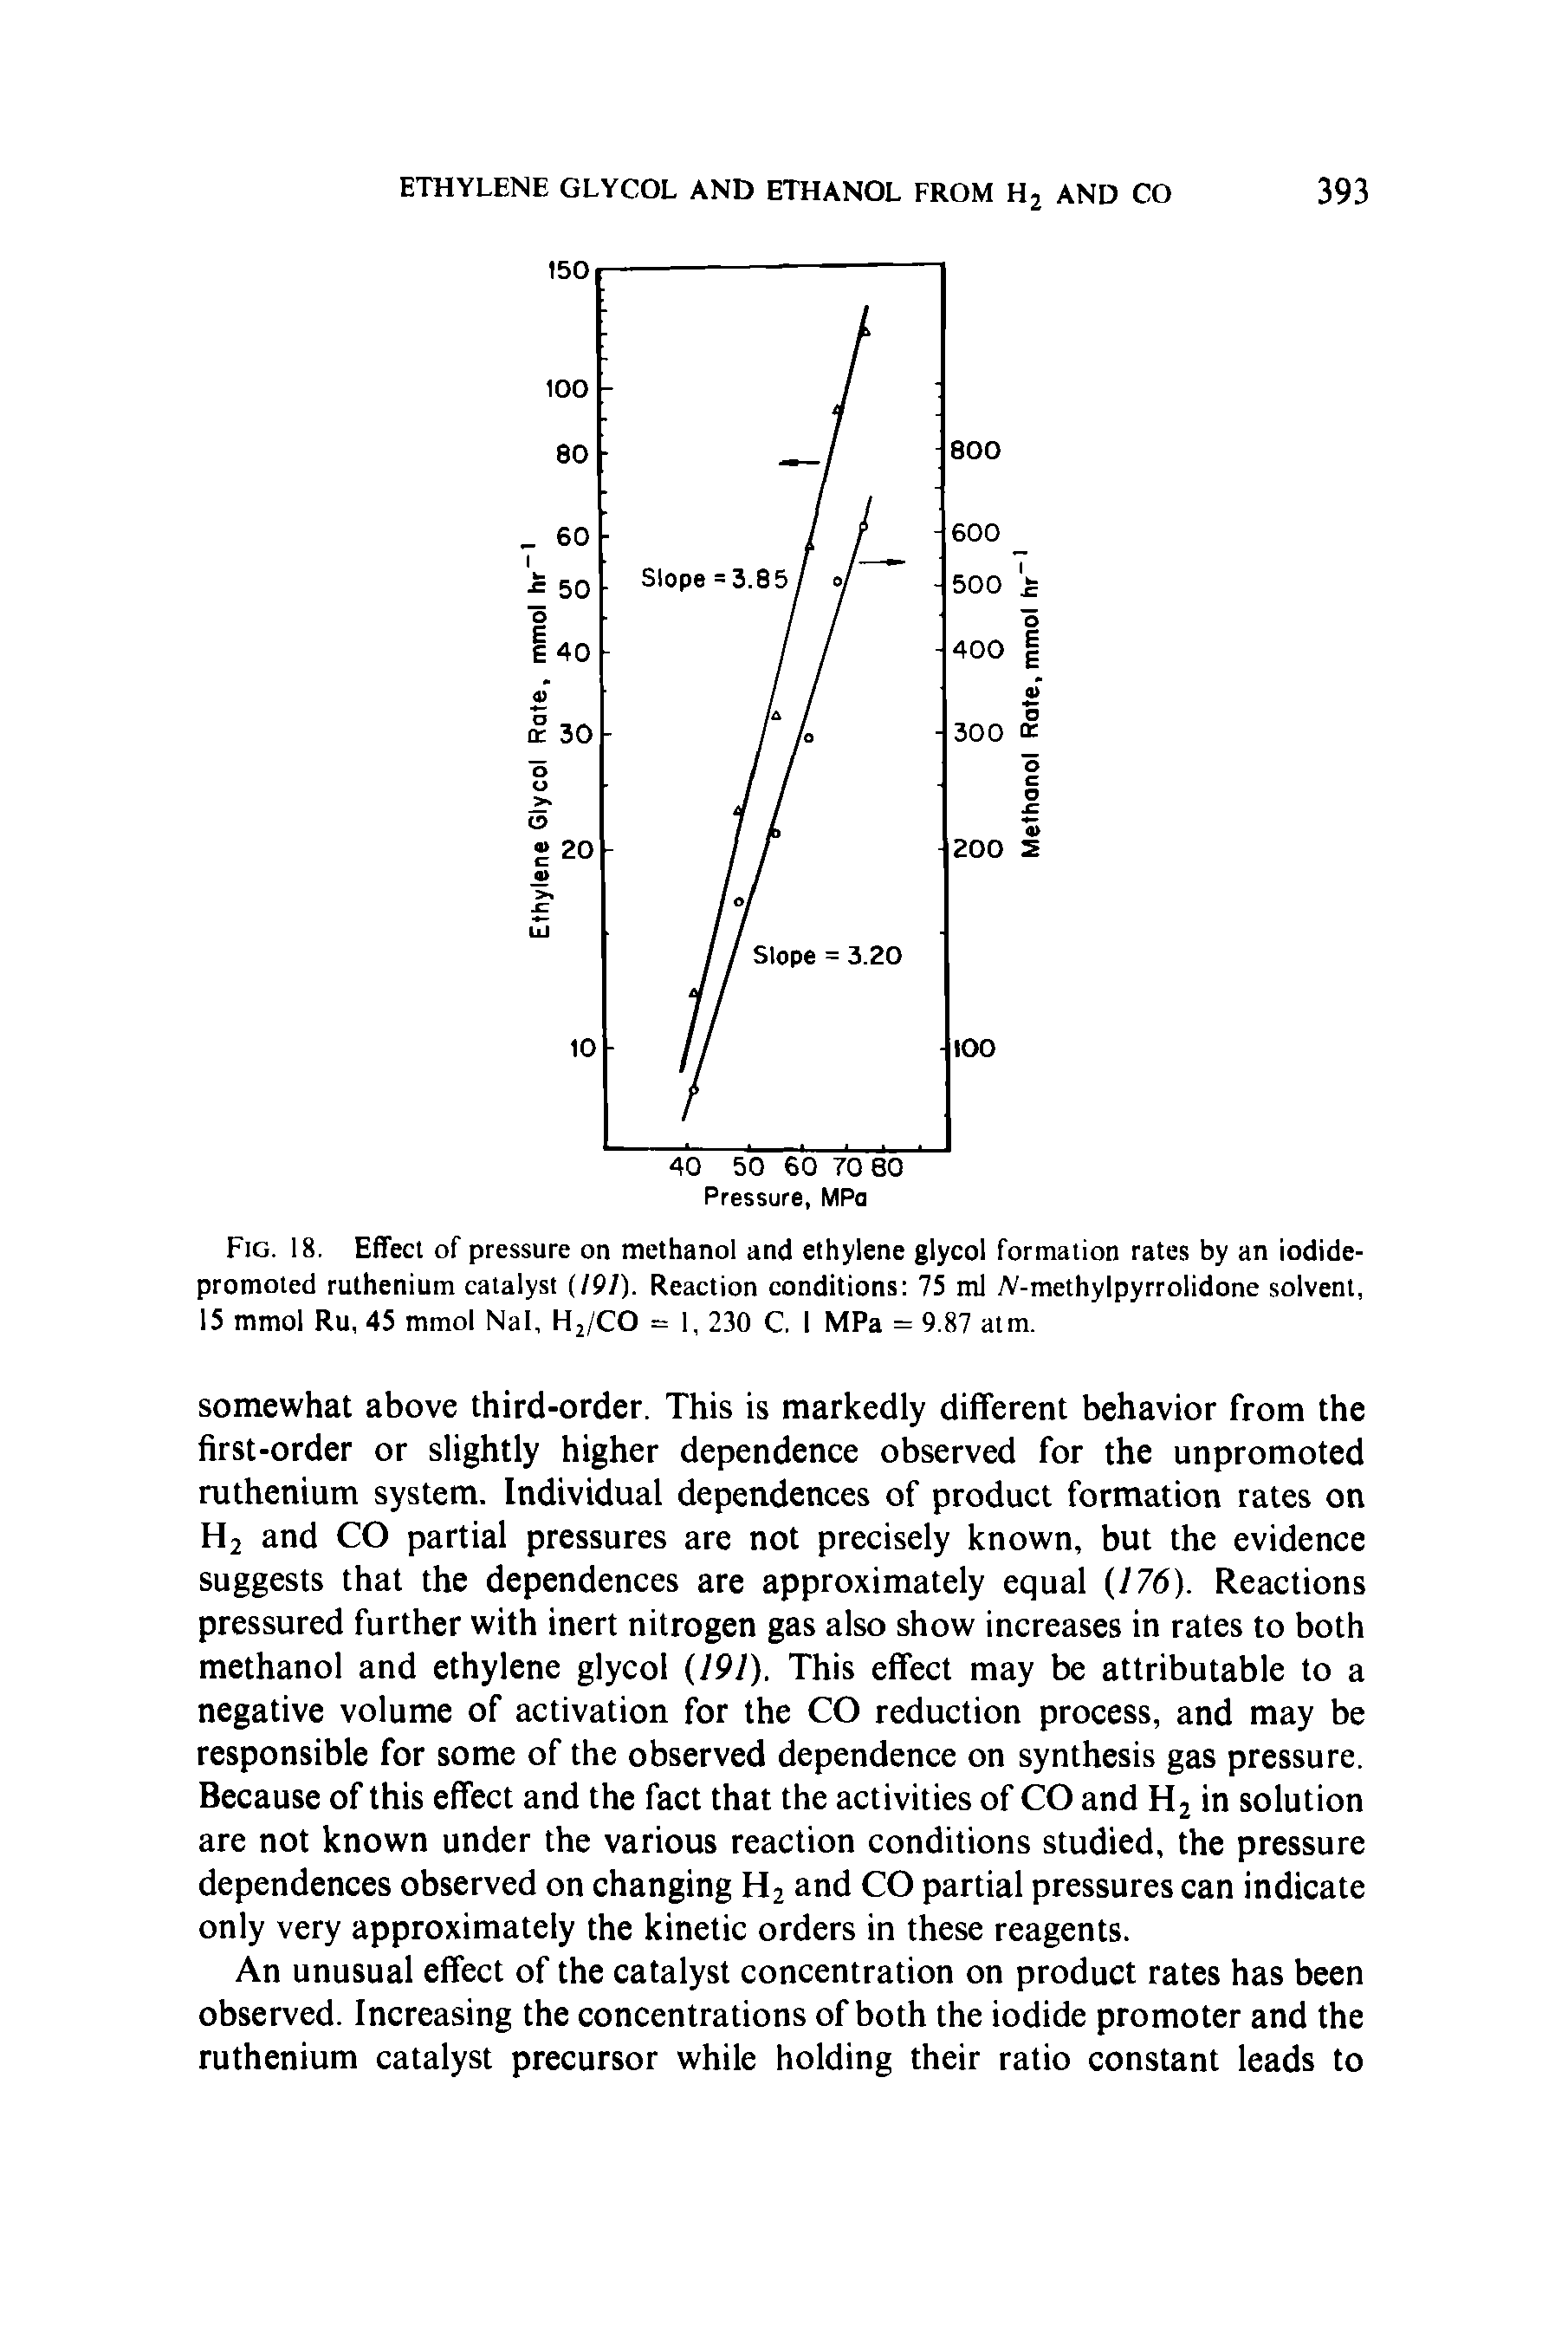 Fig. 18. Effect of pressure on methanol and ethylene glycol formation rates by an iodide-promoted ruthenium catalyst (191). Reaction conditions 75 ml A -methylpyrrolidone solvent, 15 mmol Ru, 45 mmol Nal, H2/CO = 1, 230 C. 1 MPa = 9.87 atm.